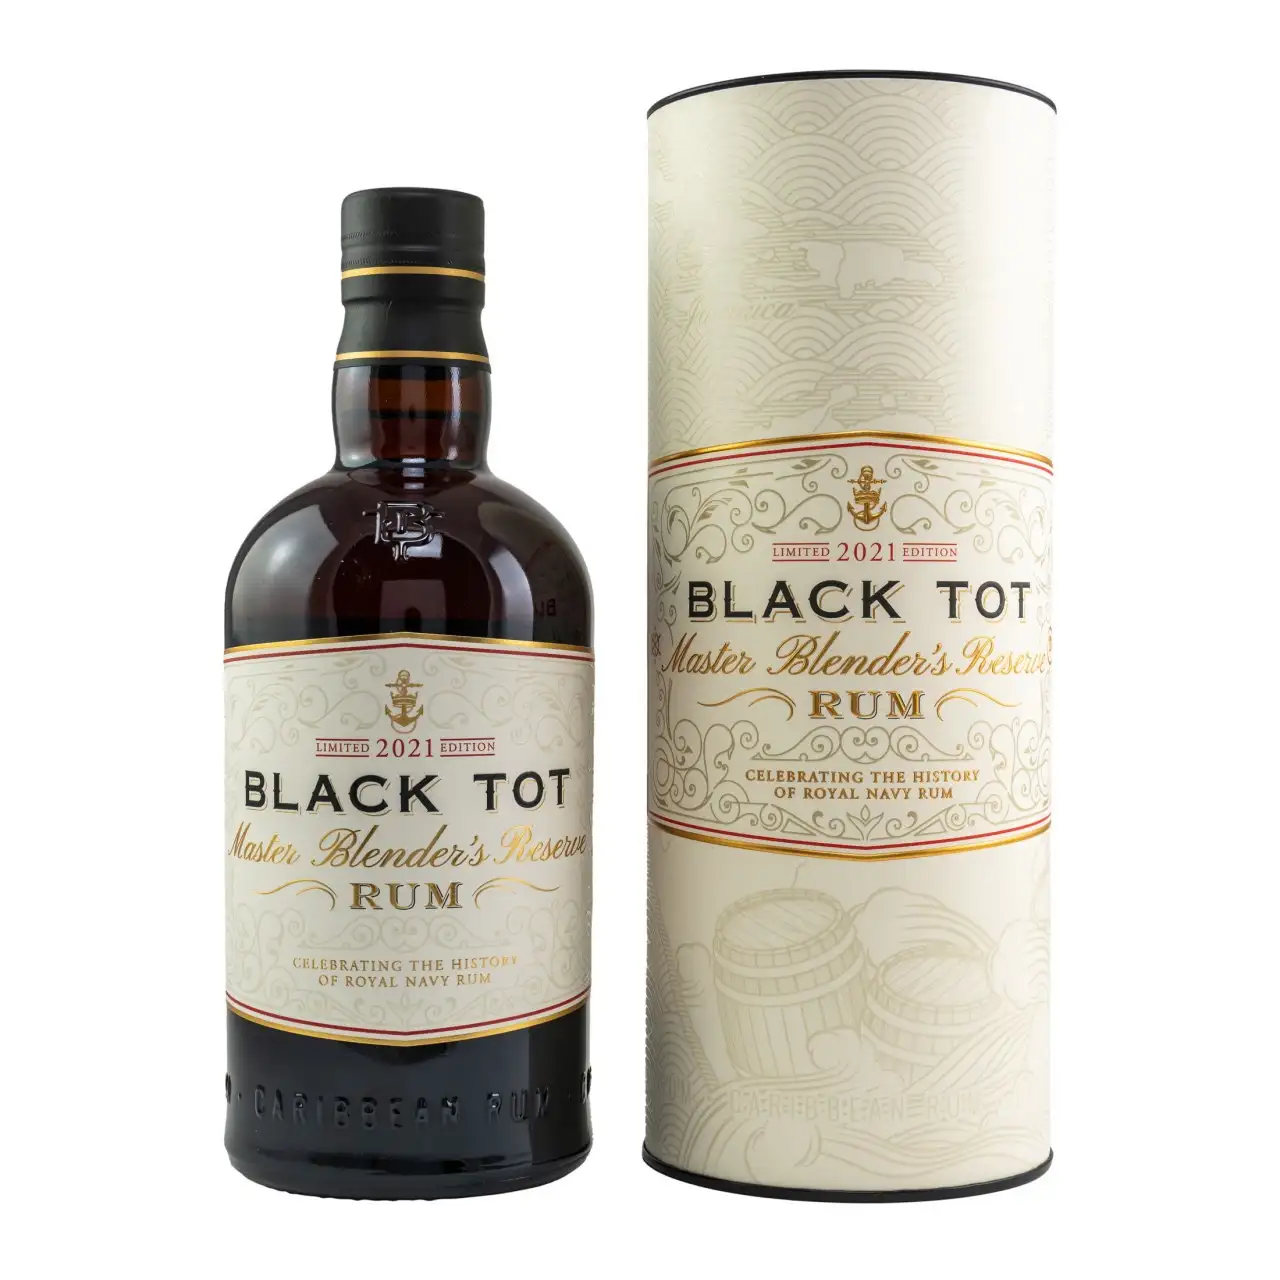 Image of the front of the bottle of the rum Black Tot Rum Master Blender’s Reserve 2021